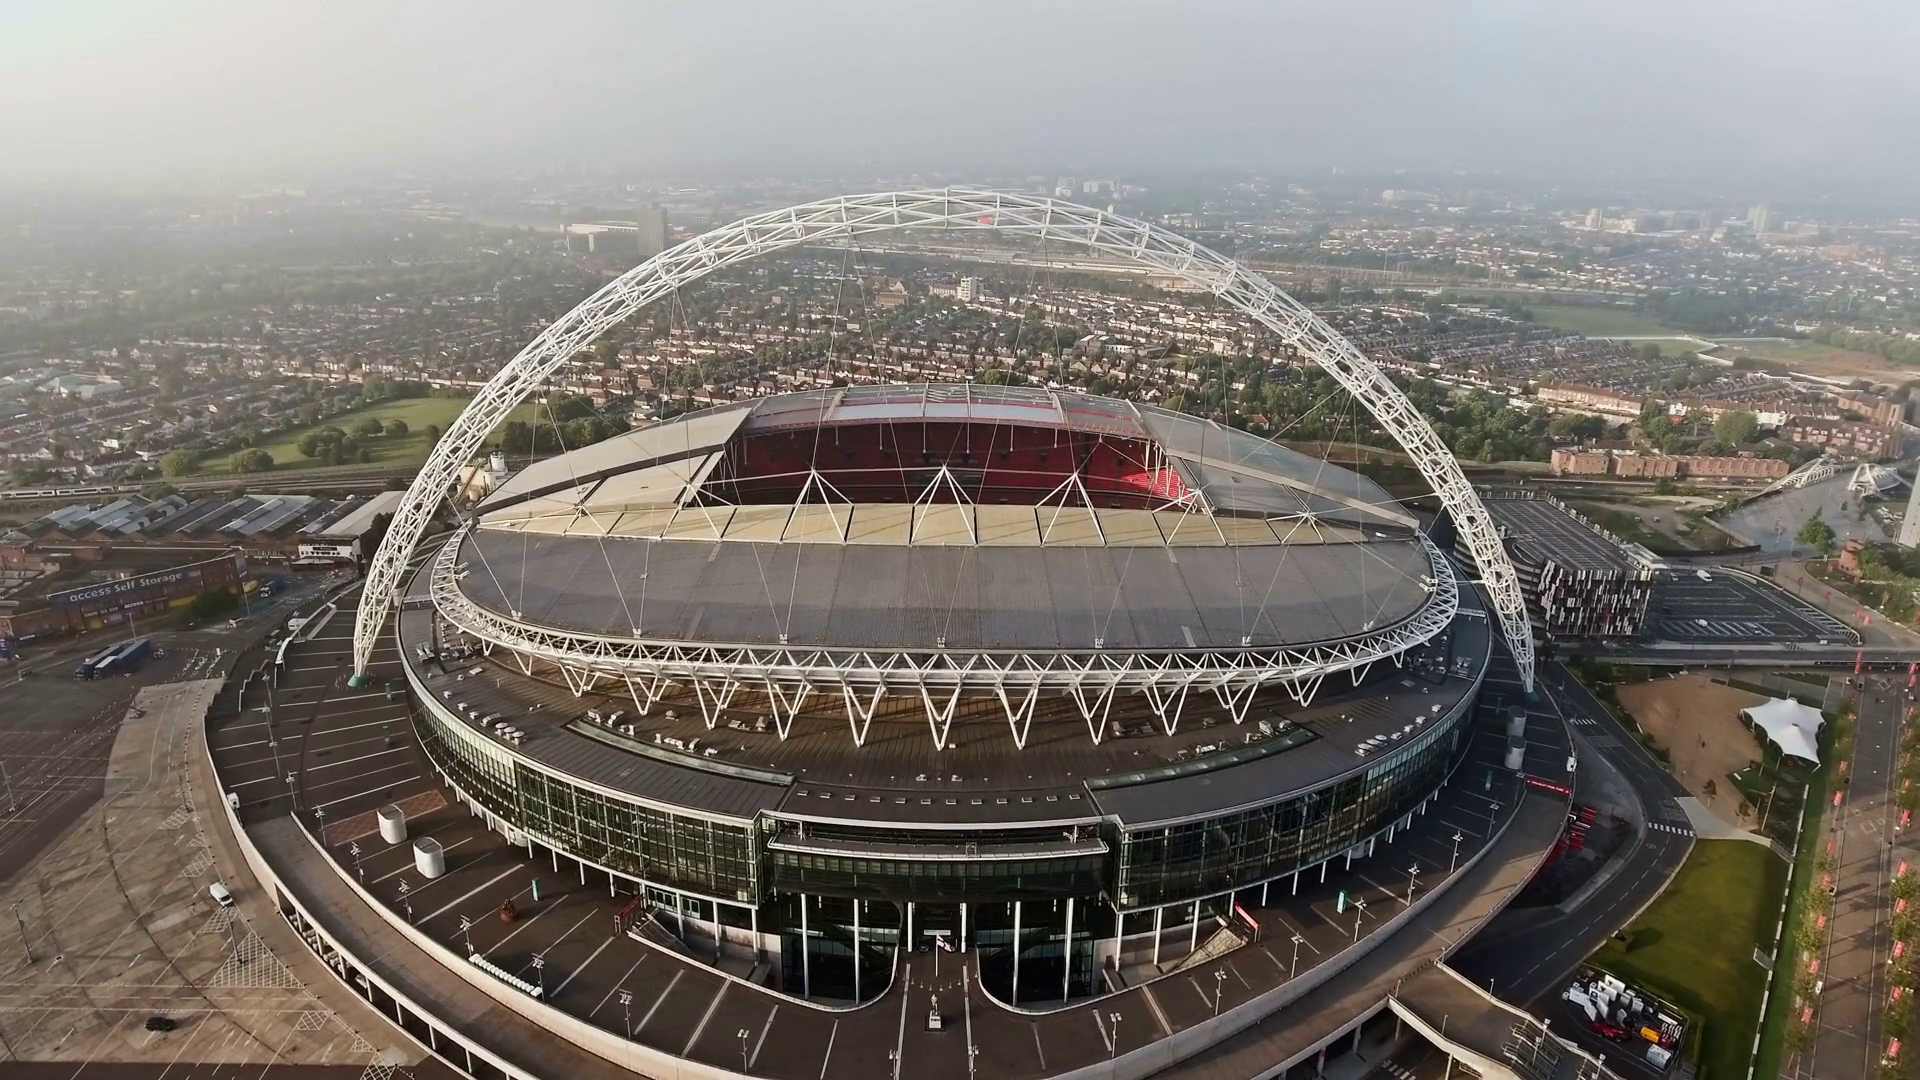 Former UK Sports Minister Tracey Crouch was unhappy that a £600 million deal to sell Wembley Stadium to help raise funds for grassroots football fell through ©Getty Images